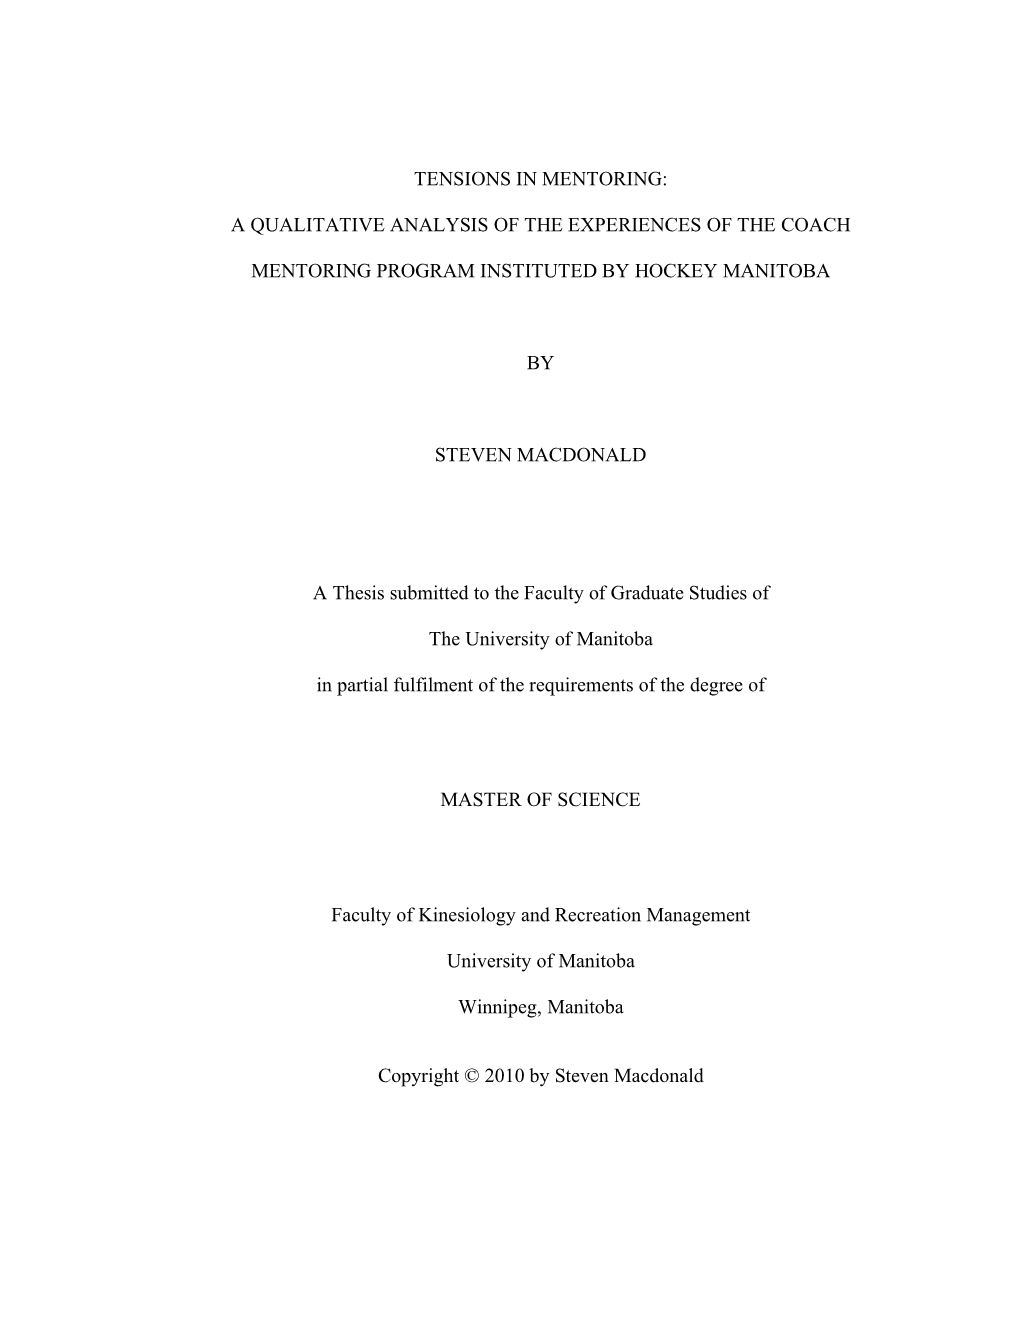 Thesis Submitted to the Faculty of Graduate Studies Of